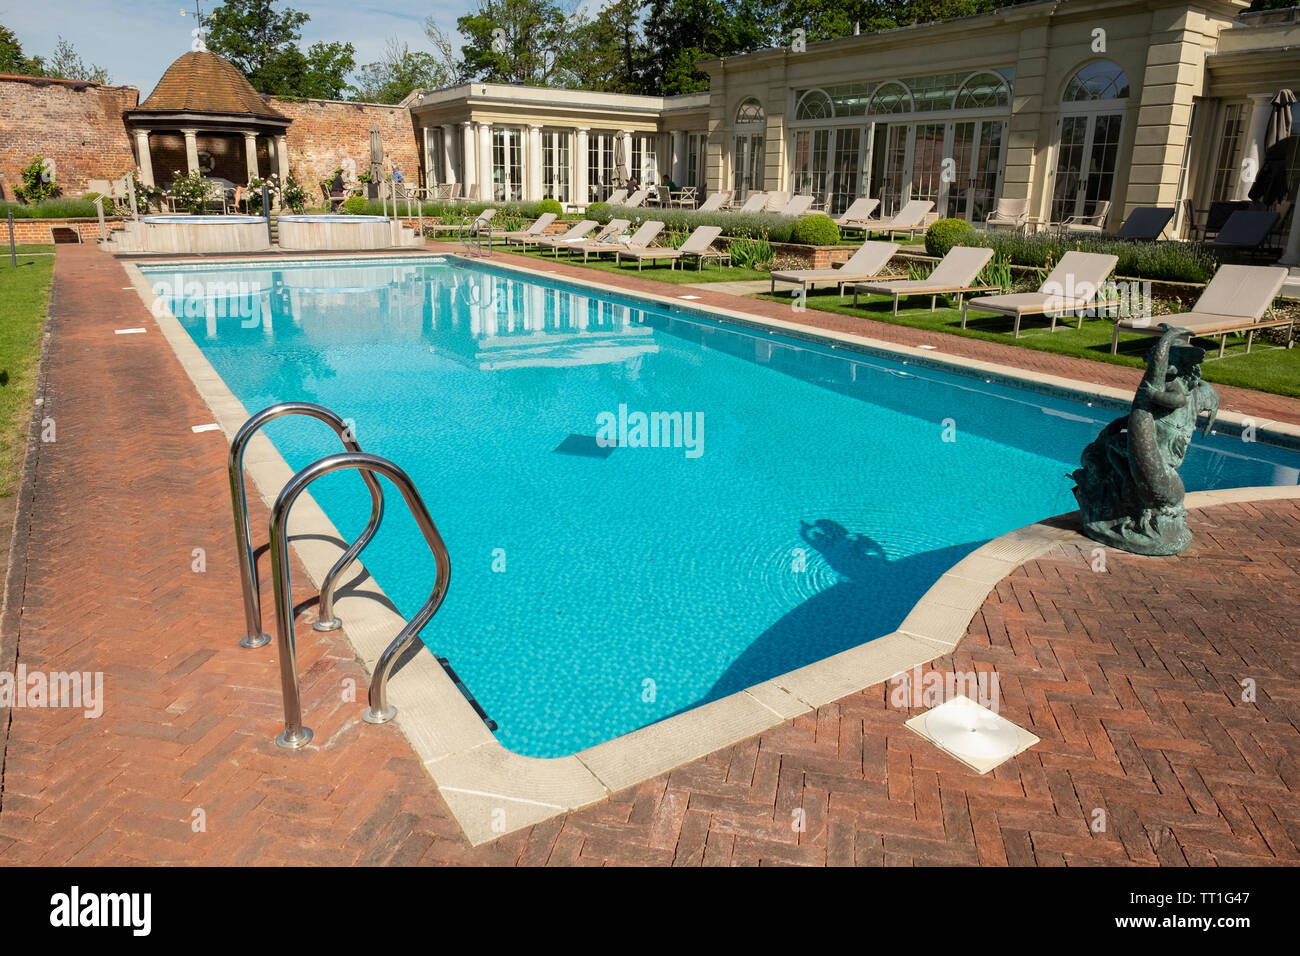 Outdoor swimming pool at Cliveden House luxury hotel, near Maidenhead, England, UK. Where Christine Keeler first met Profumo in the Profumo scandal. Stock Photo